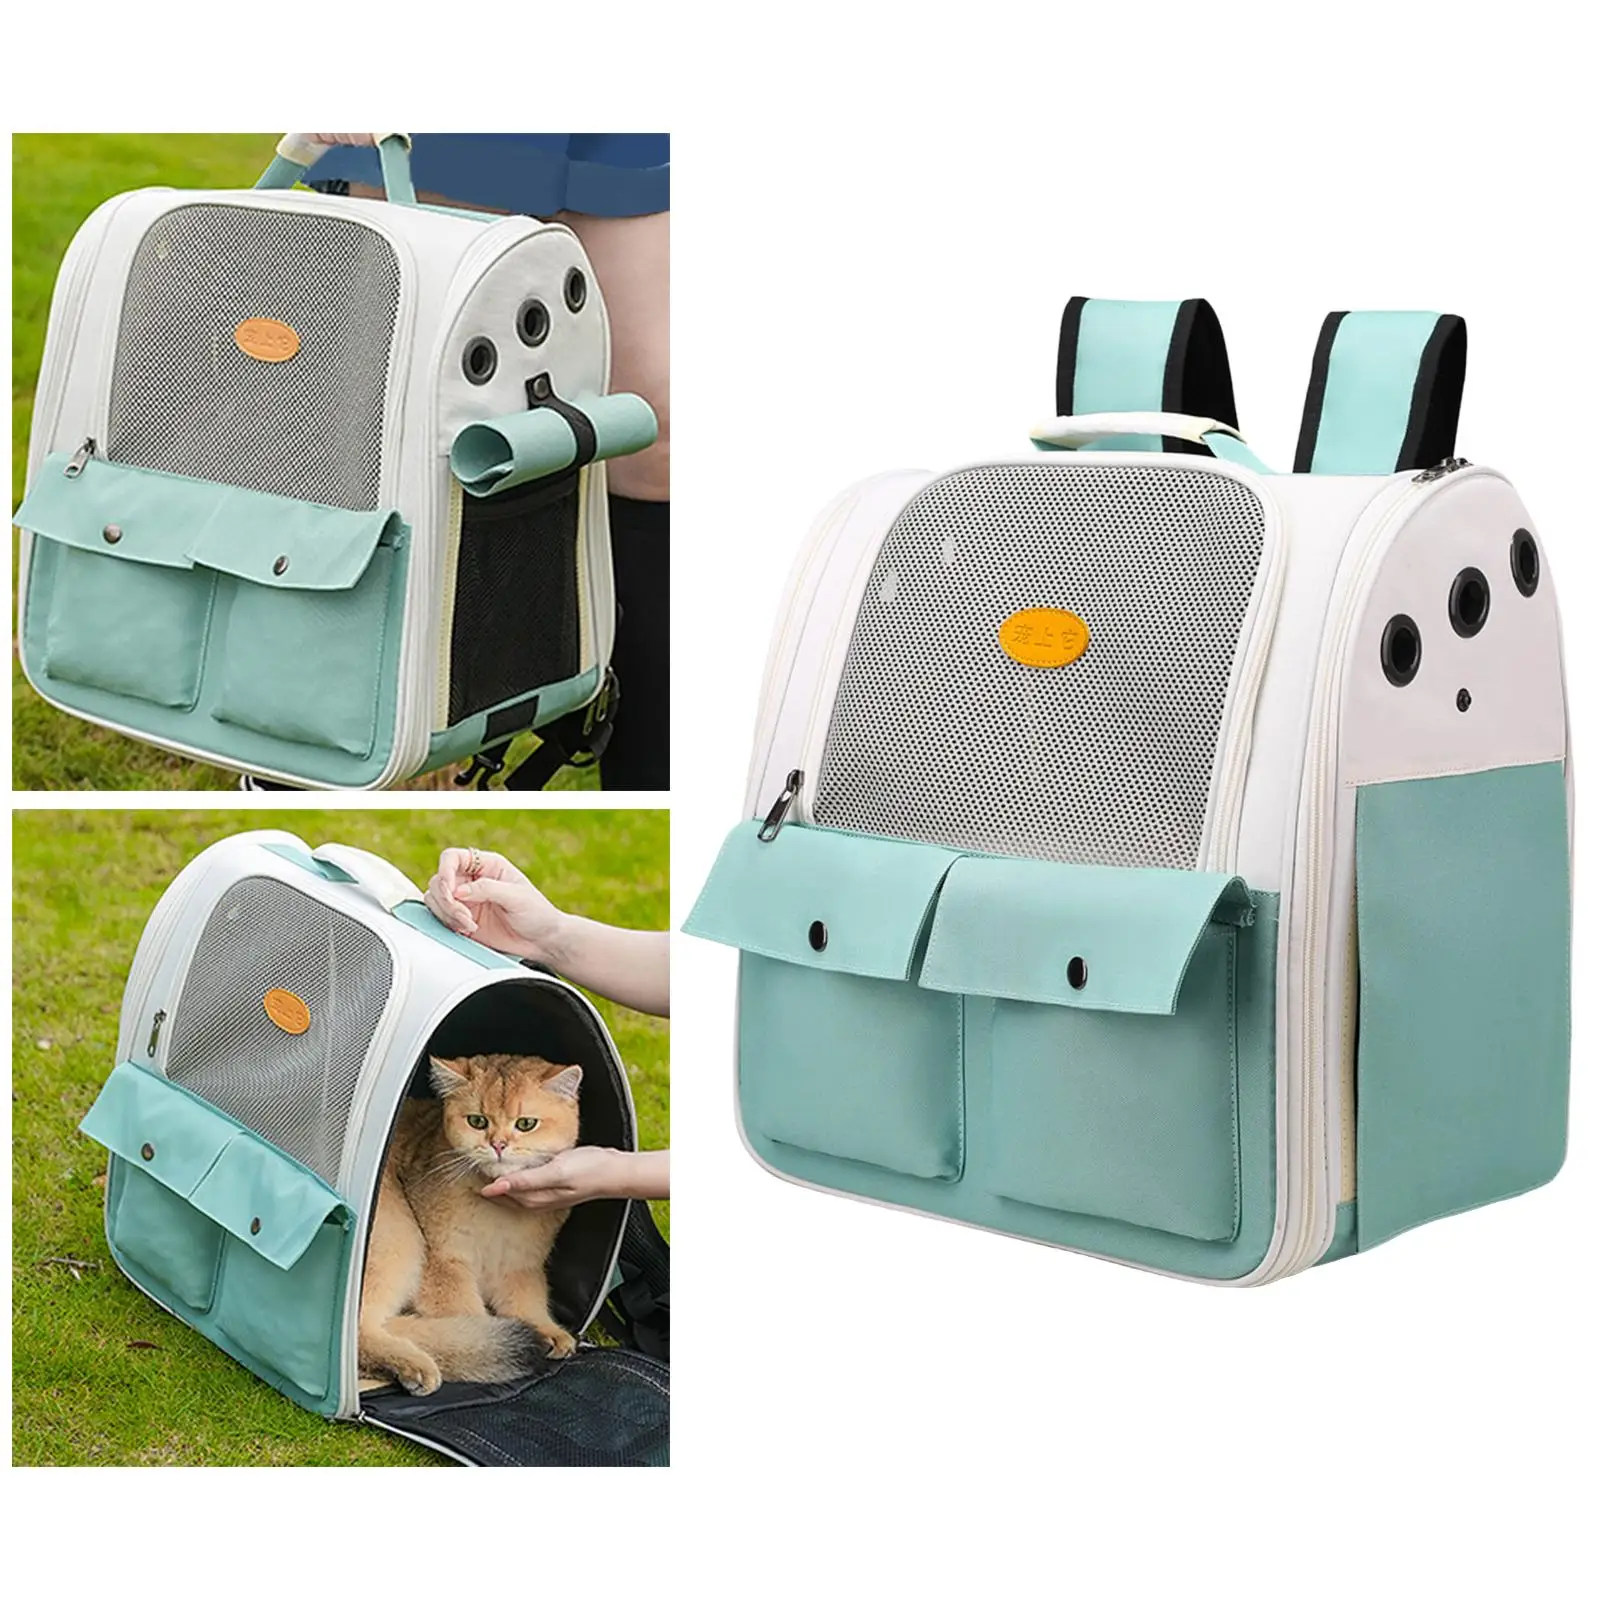 Pet Travel Bag Collapsible Soft Ventilation Backpack Carrying Bags Handbag for Walking Traveling Outdoor Use Cat Small Animals